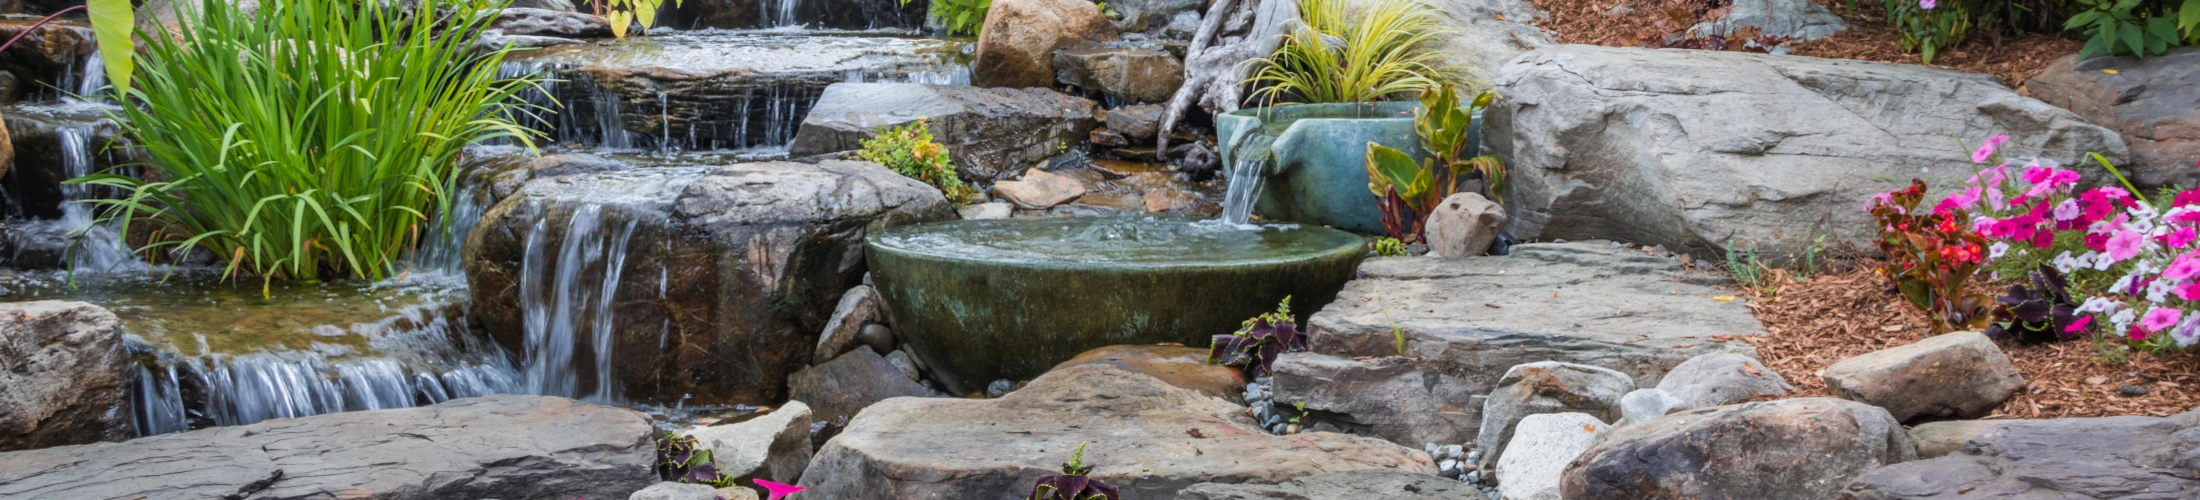 Water Features - A Fascinating Focal Point for Your Landscaping